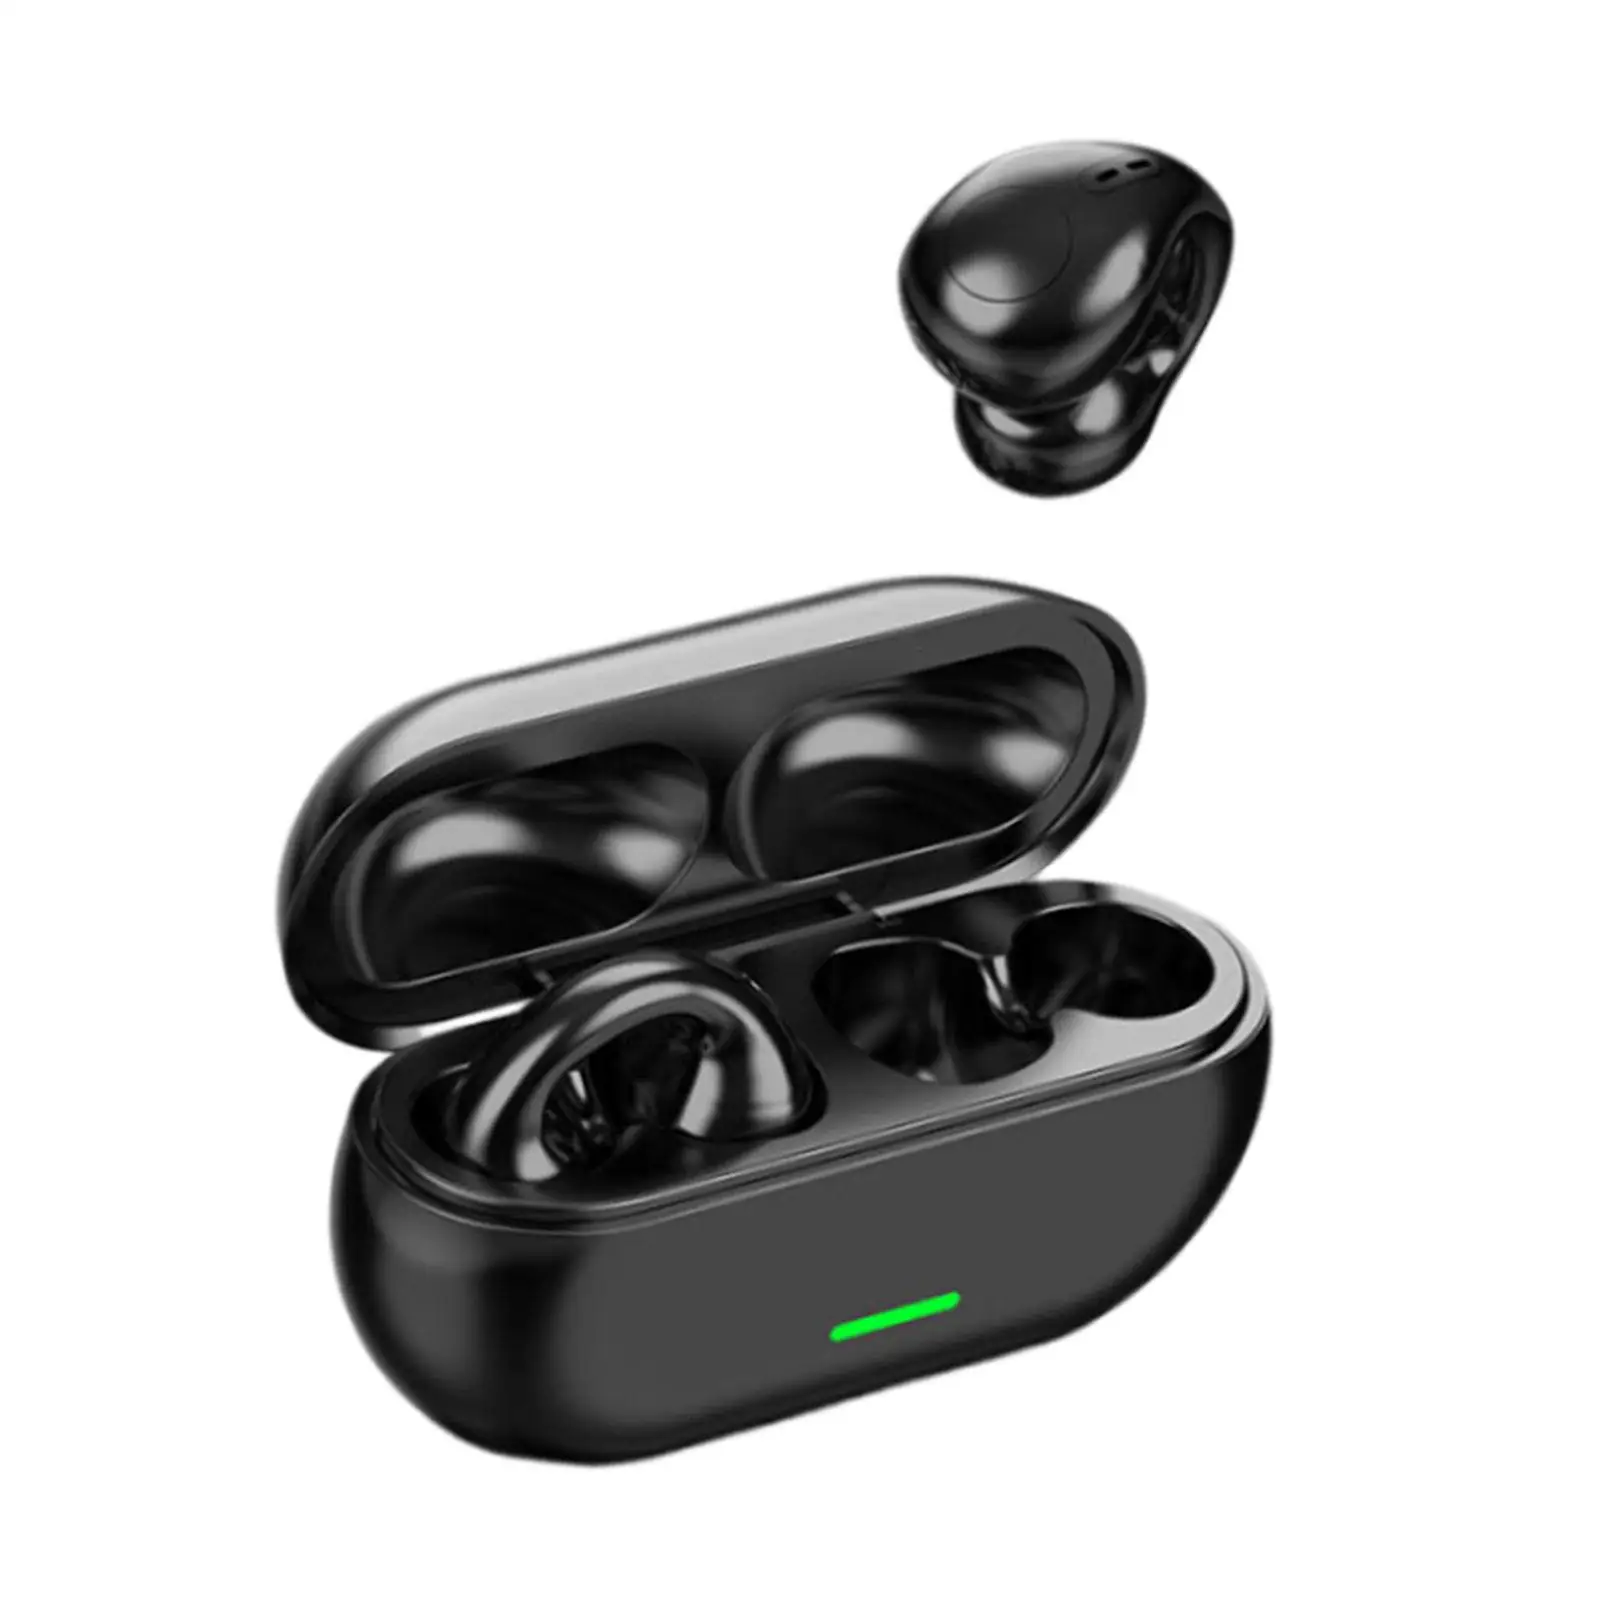 Air Conduction Headphones with Charging Case Hands Free Calling Earpiece Sport Earphones for Games Workout Gym Cycling Office